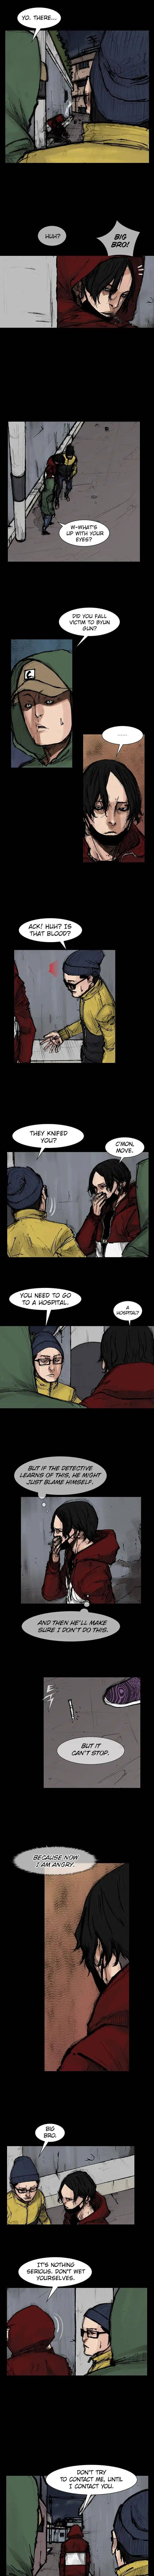 Dokgo 2 Chapter 58 Page 3